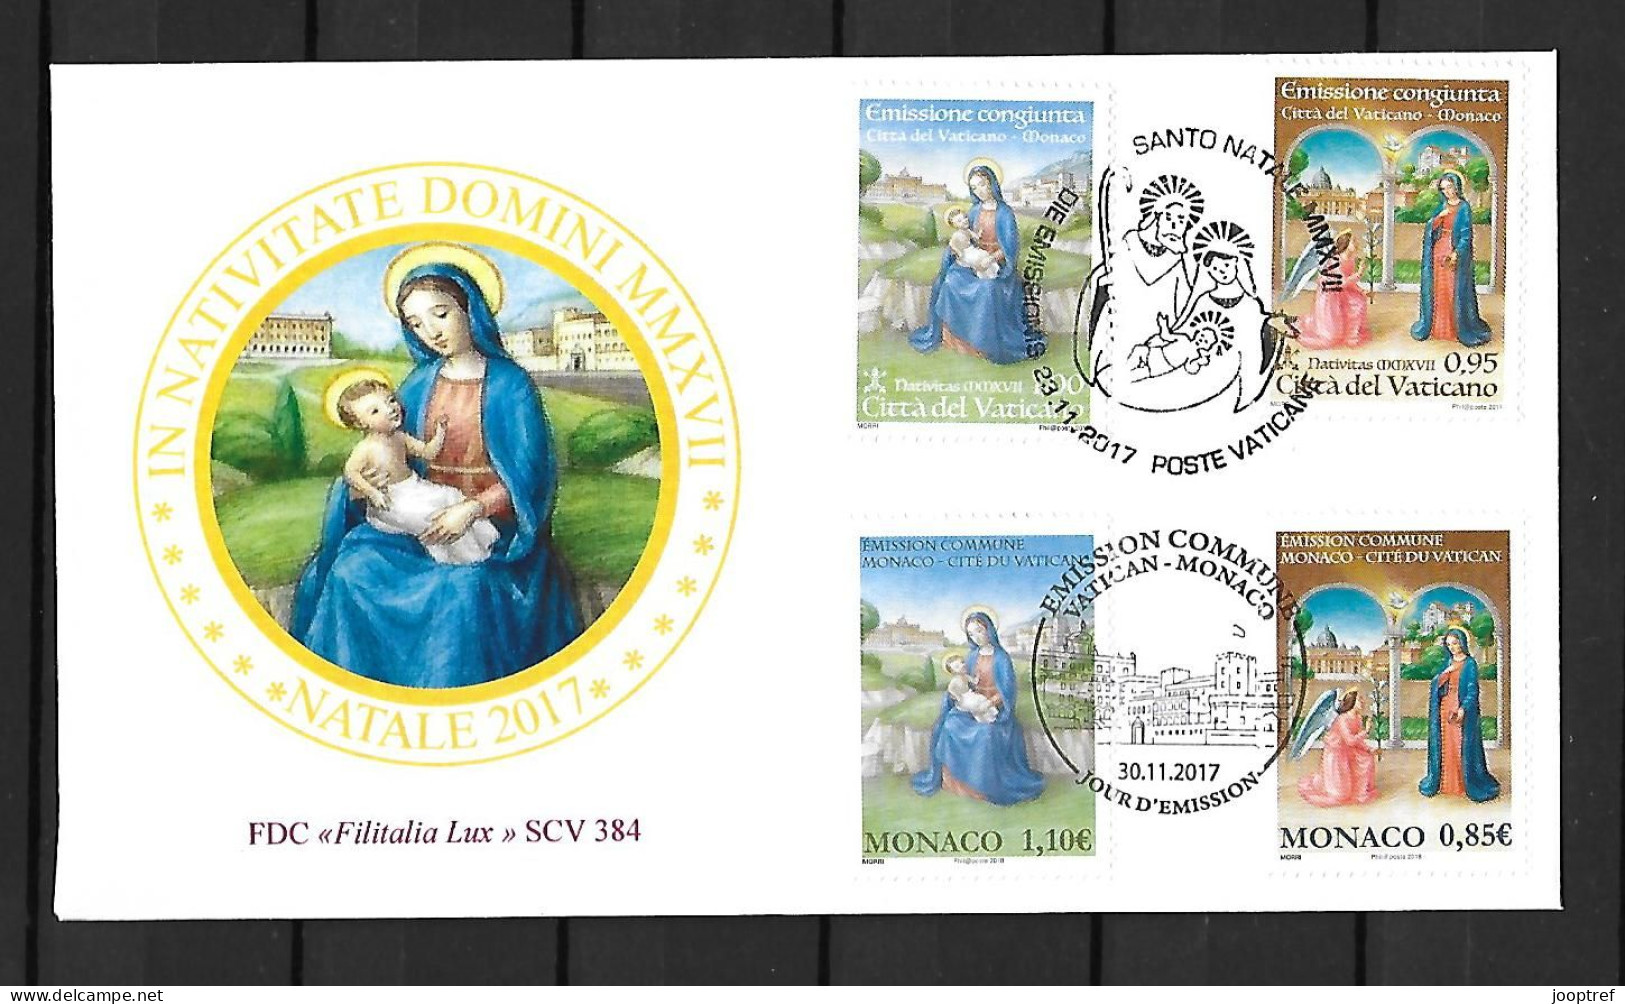 2017 Joint/Commune/Congiunta Vatican And Monaco, MIXED FDC WITH 2+2 STAMPS: Christmas - Emissions Communes